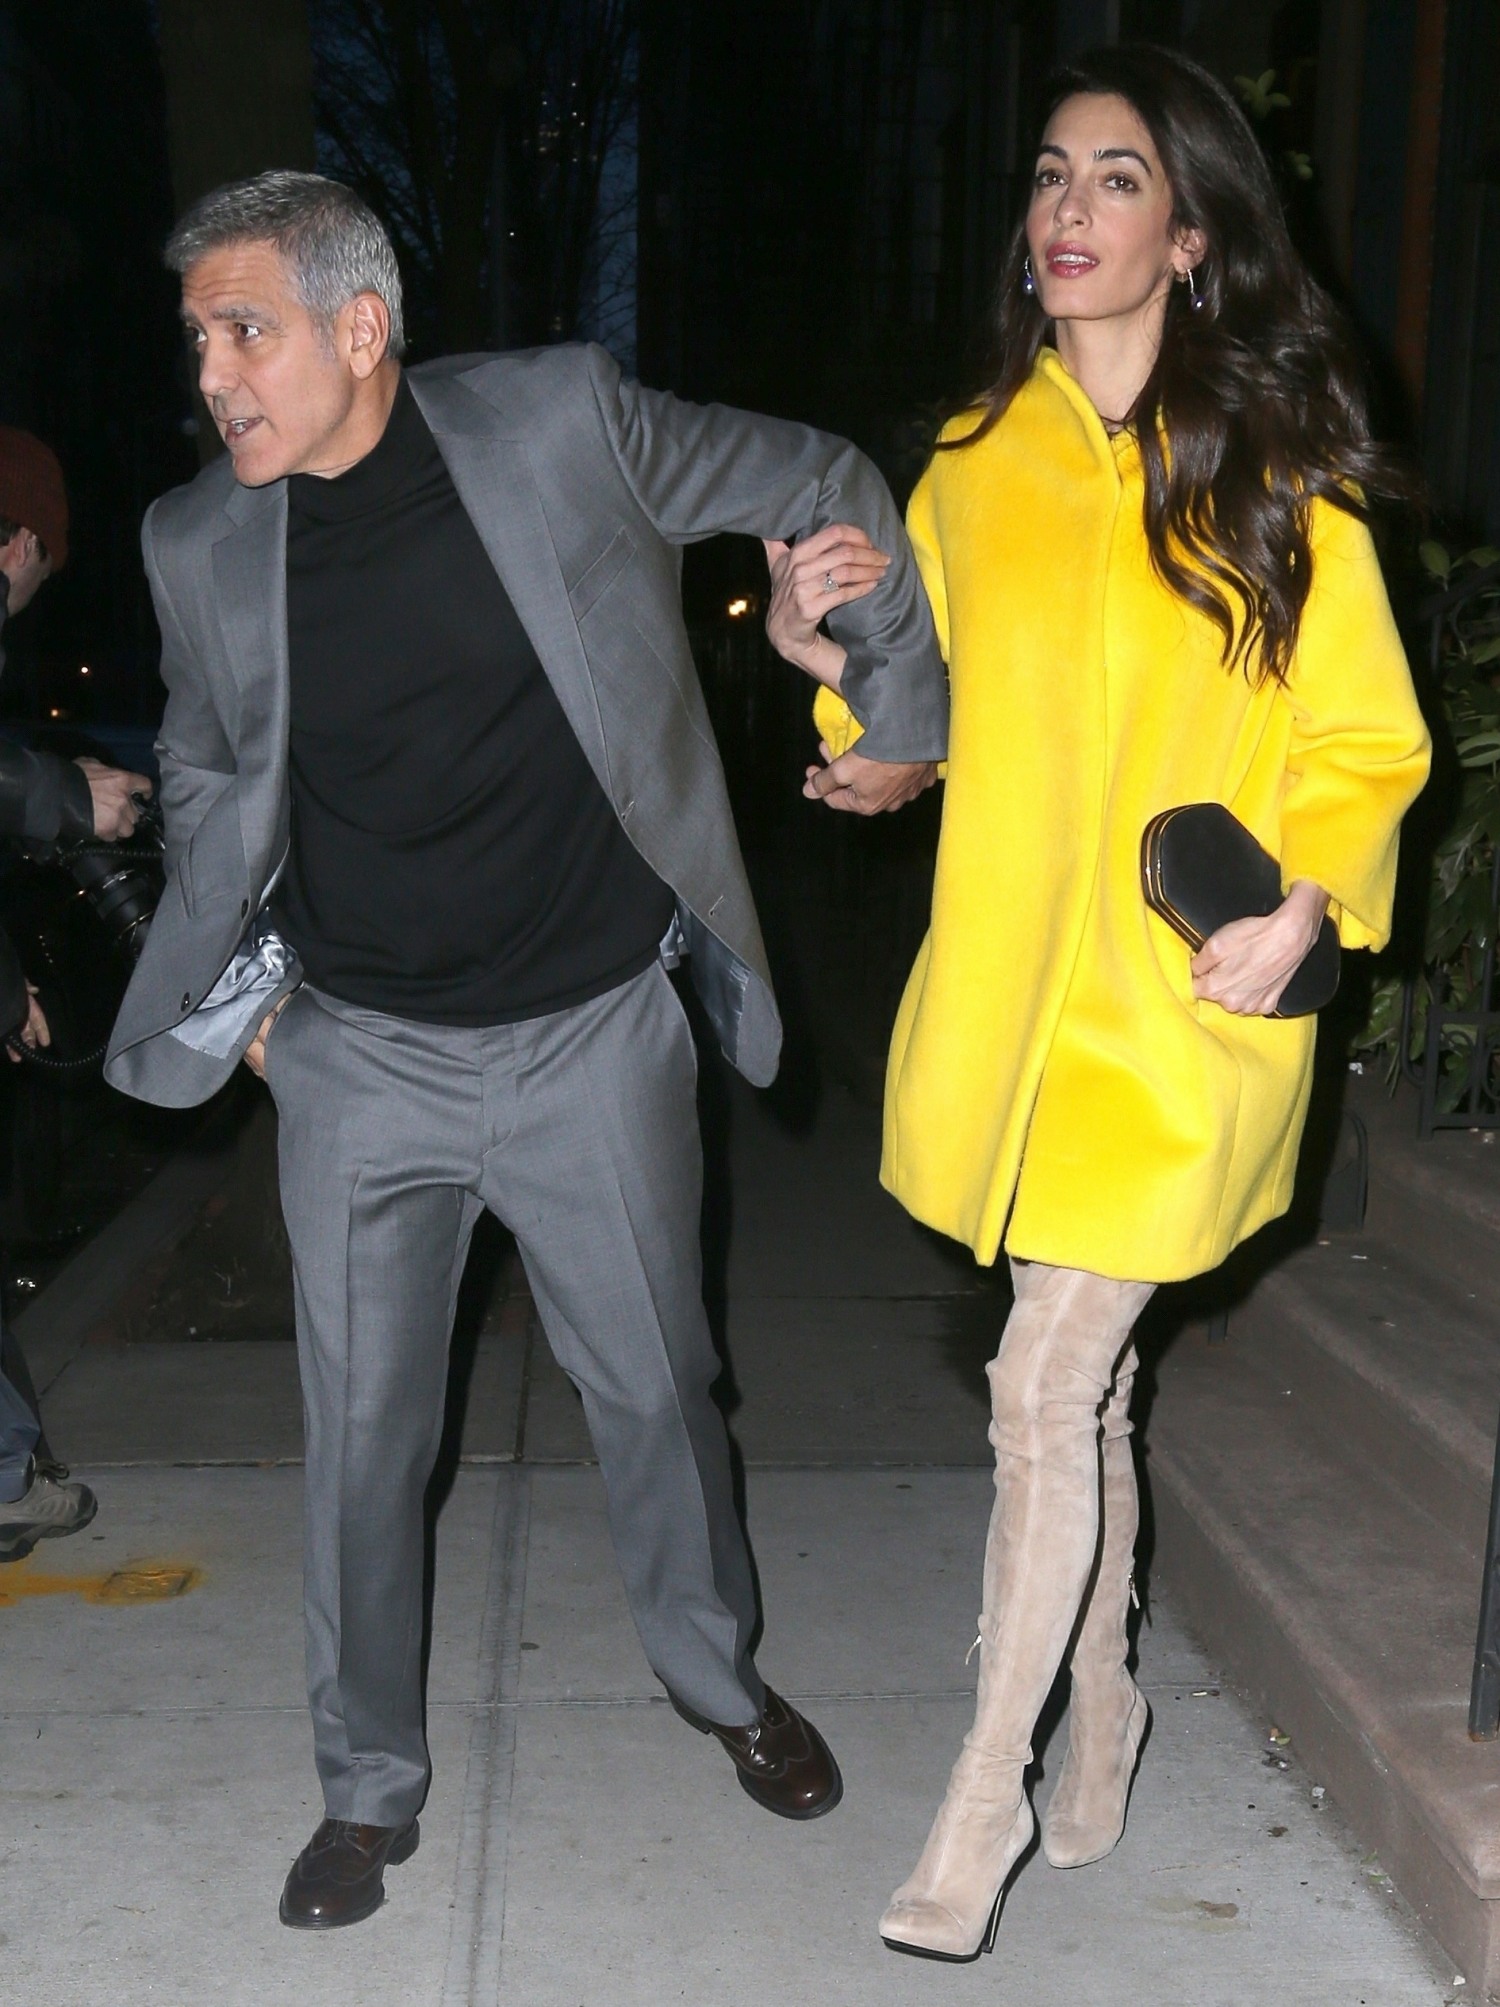 George and Amal Clooney stick close as they head to dinner